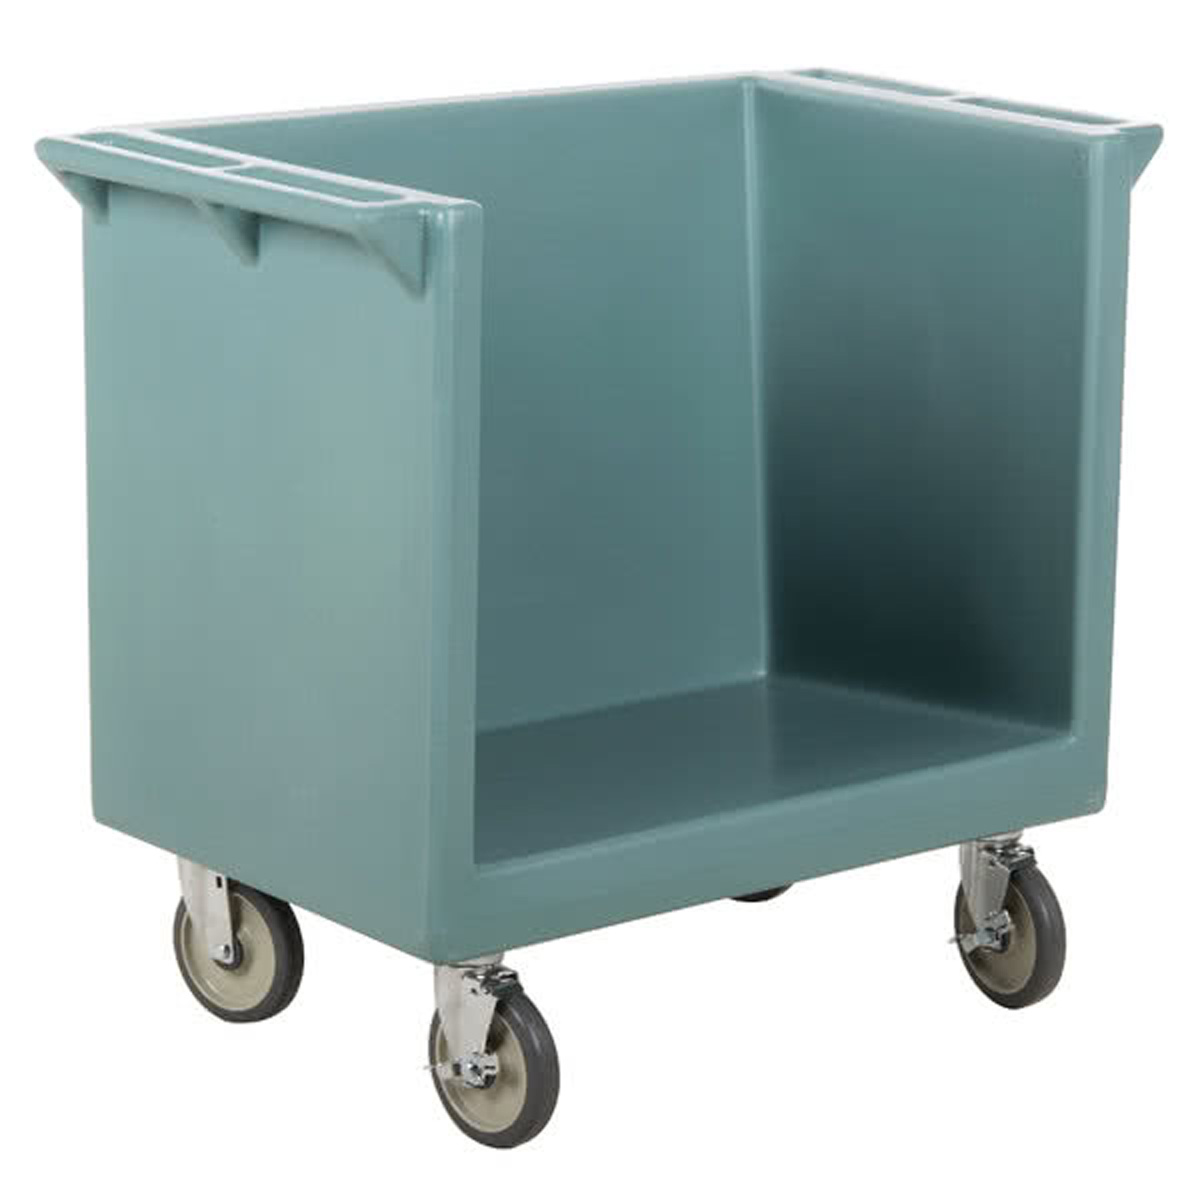 Cambro TDC2029401 Tray & Dish Cart: CART ONLY - Slate Blue